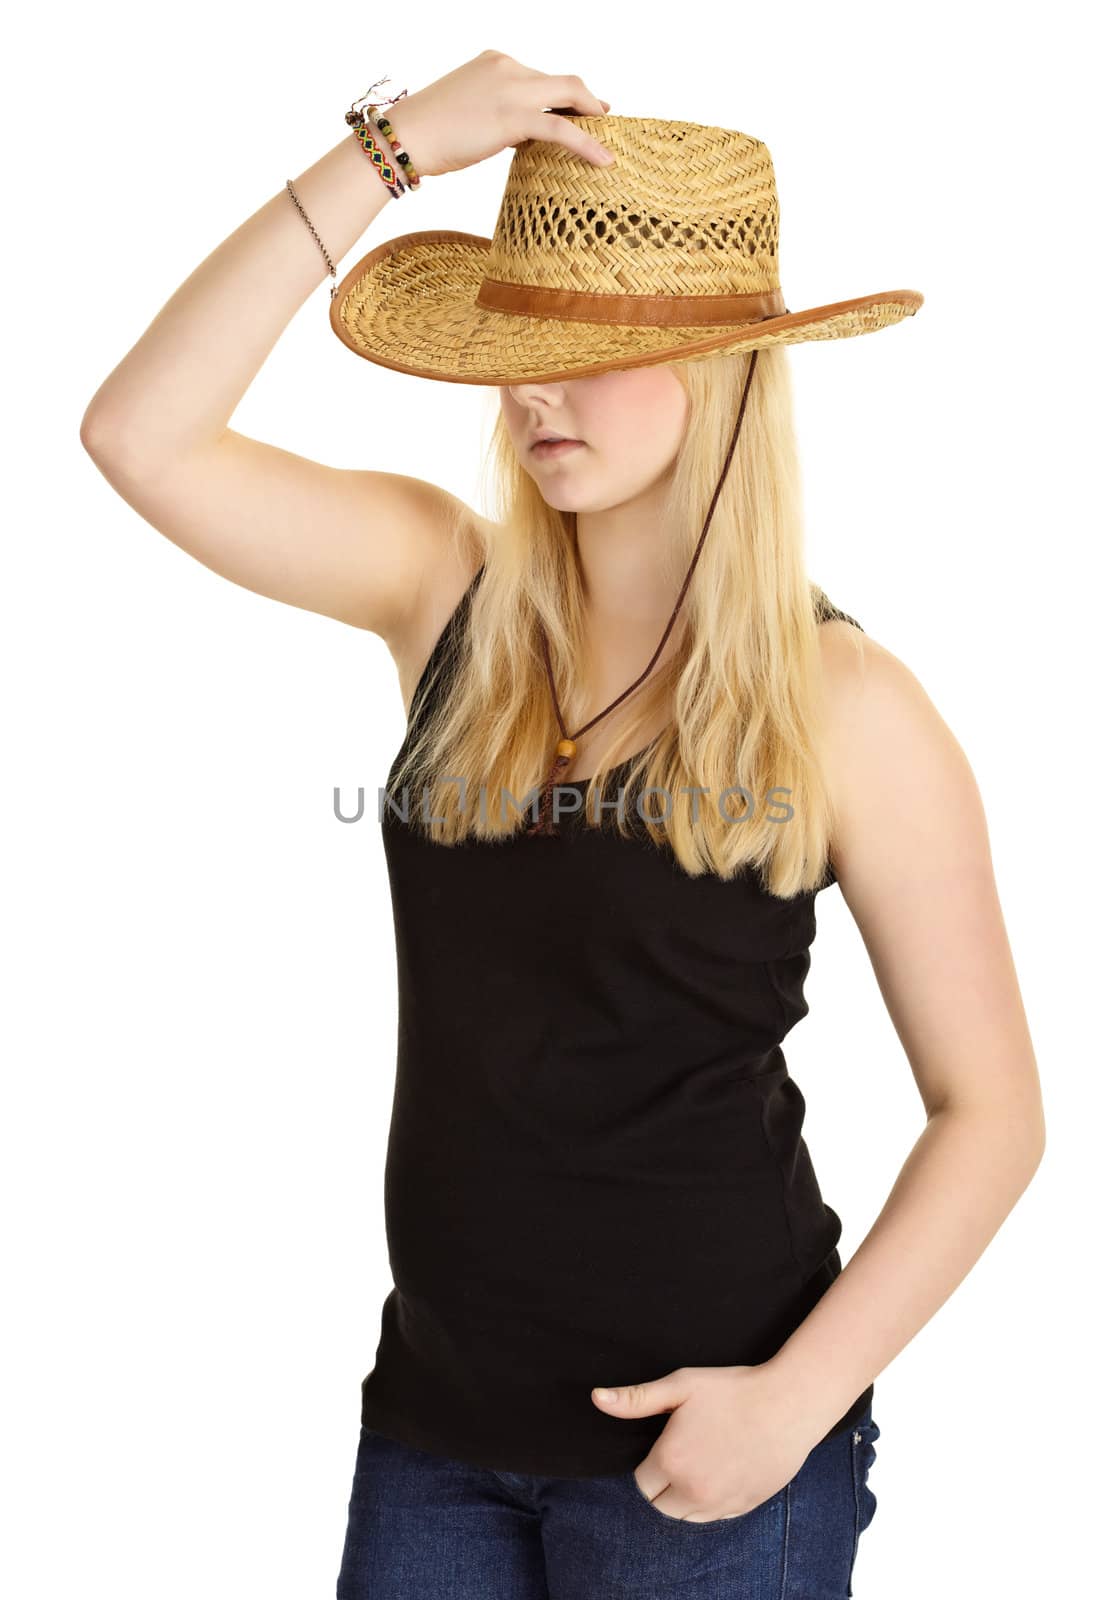 Young pale girl in old-fashioned straw hat by pzaxe